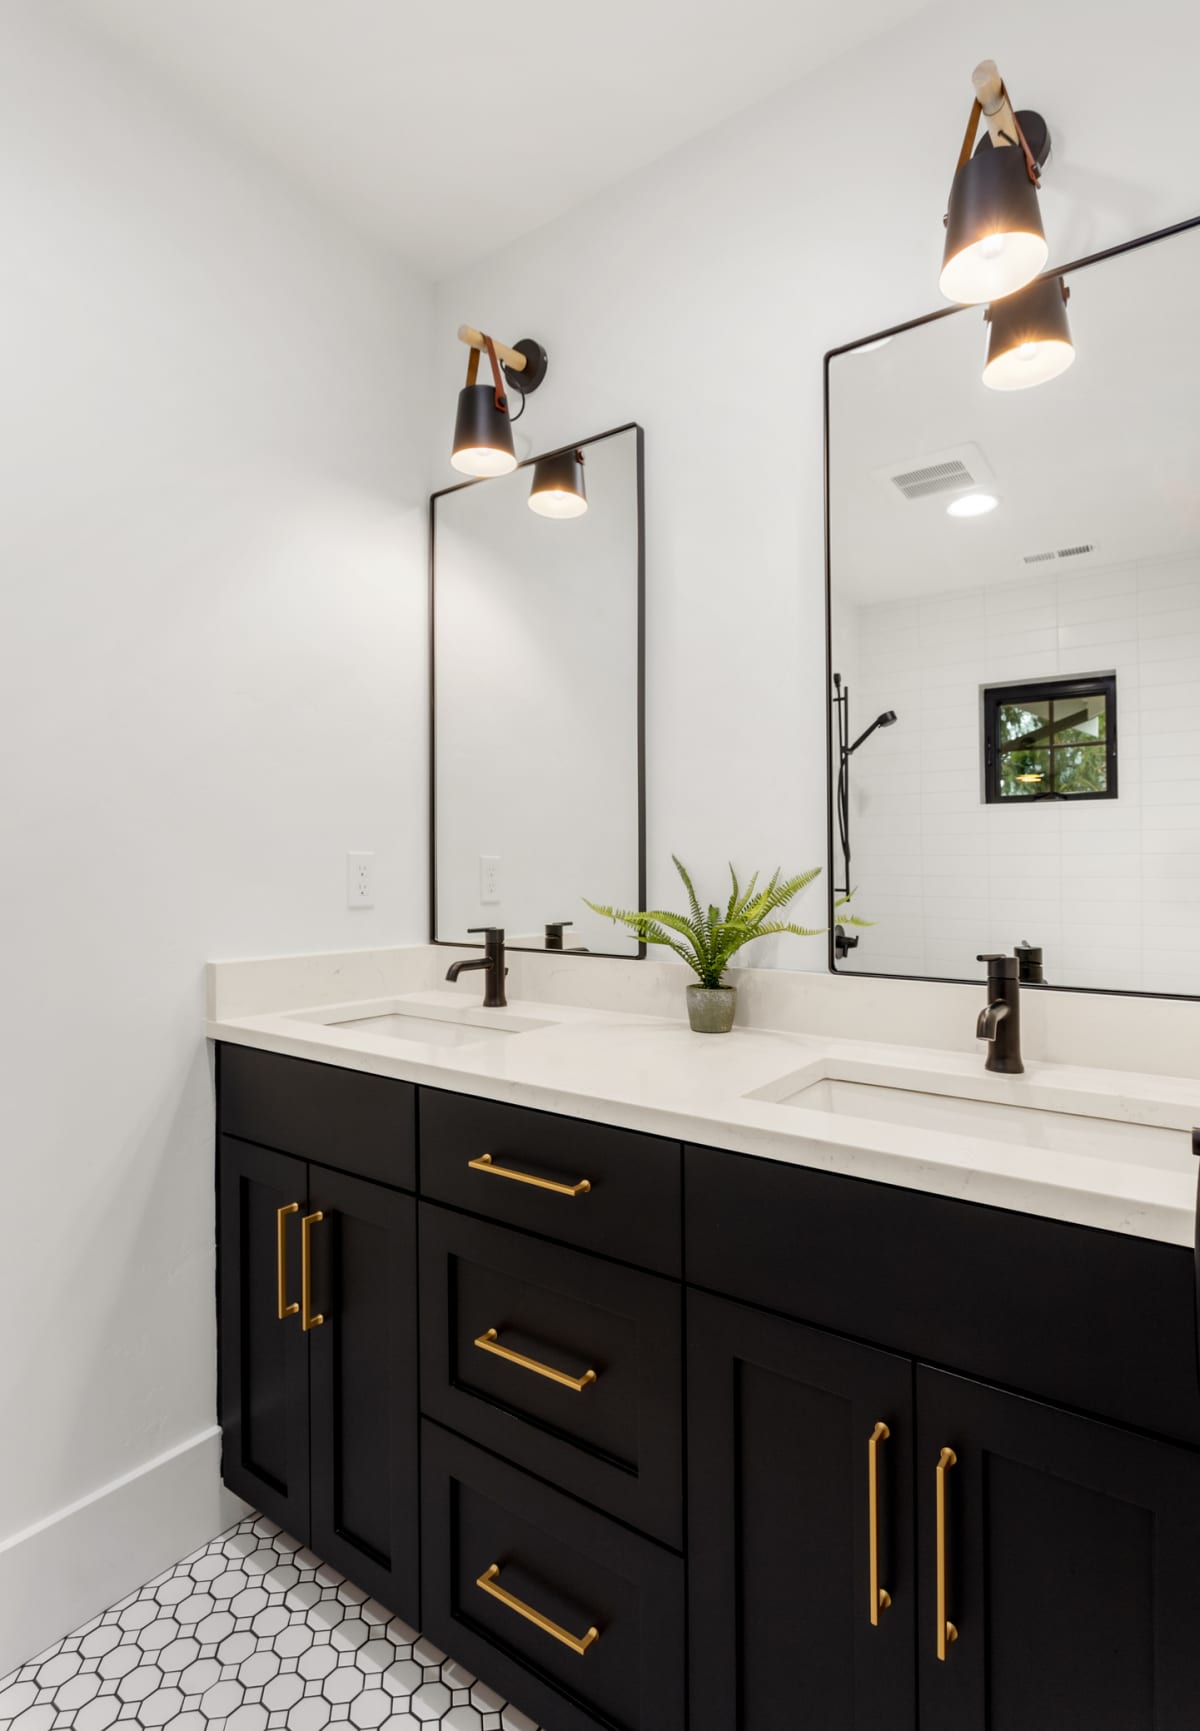 A bathroom with vanity, mirrors, and cabinets